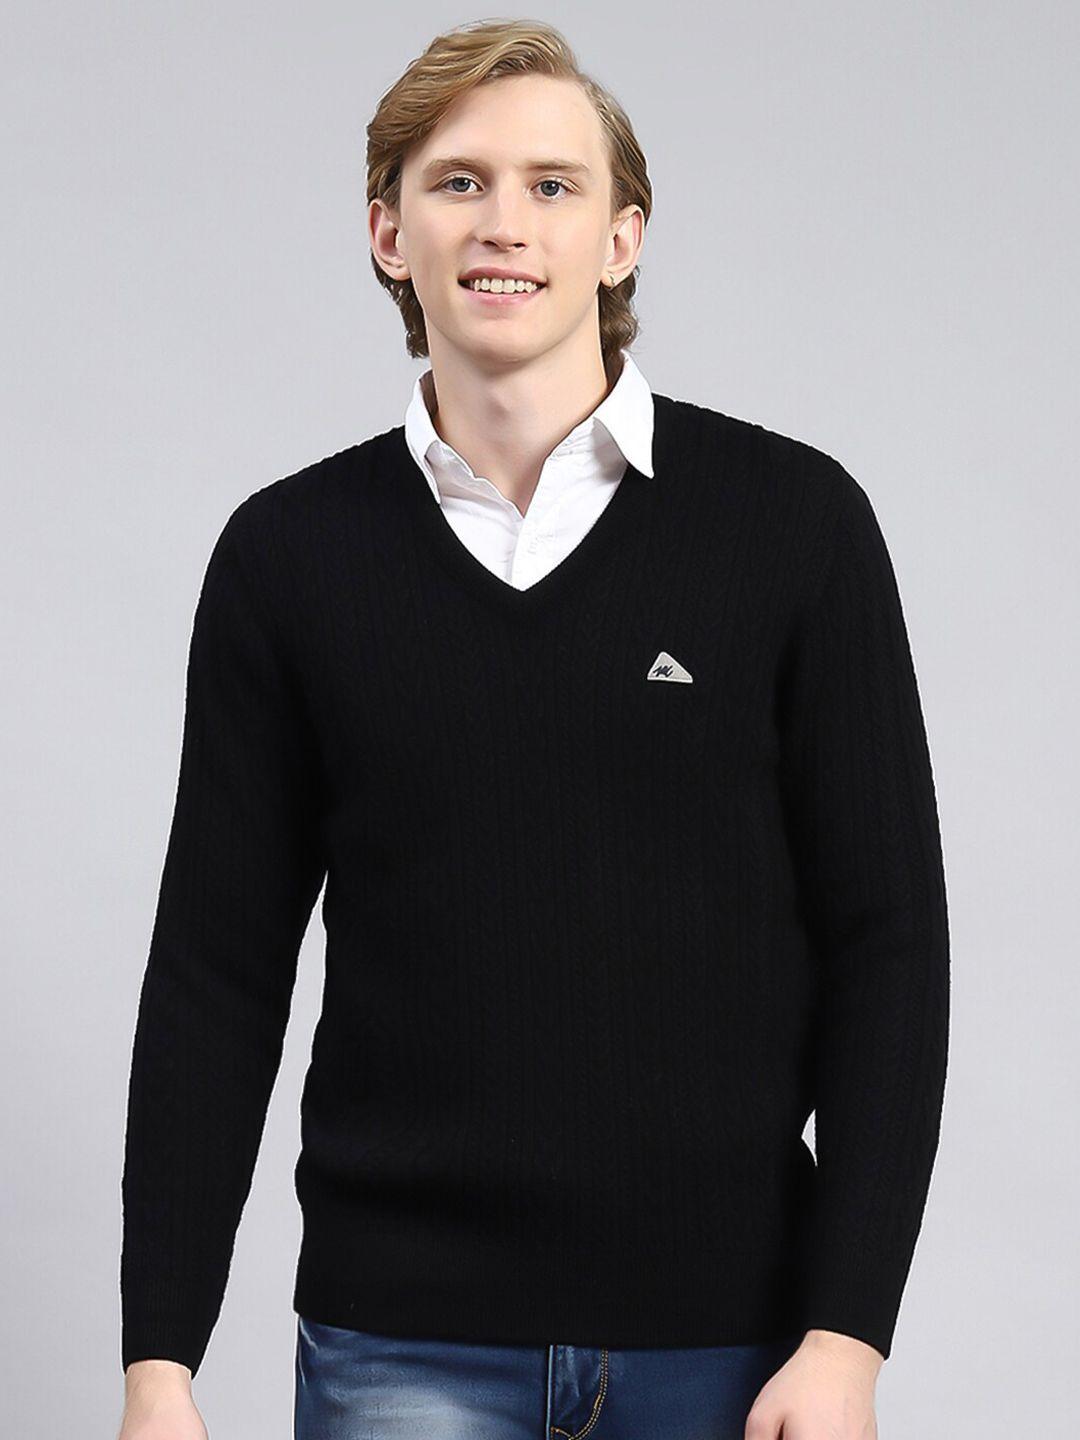 monte carlo v-neck long sleeves woolen pullover